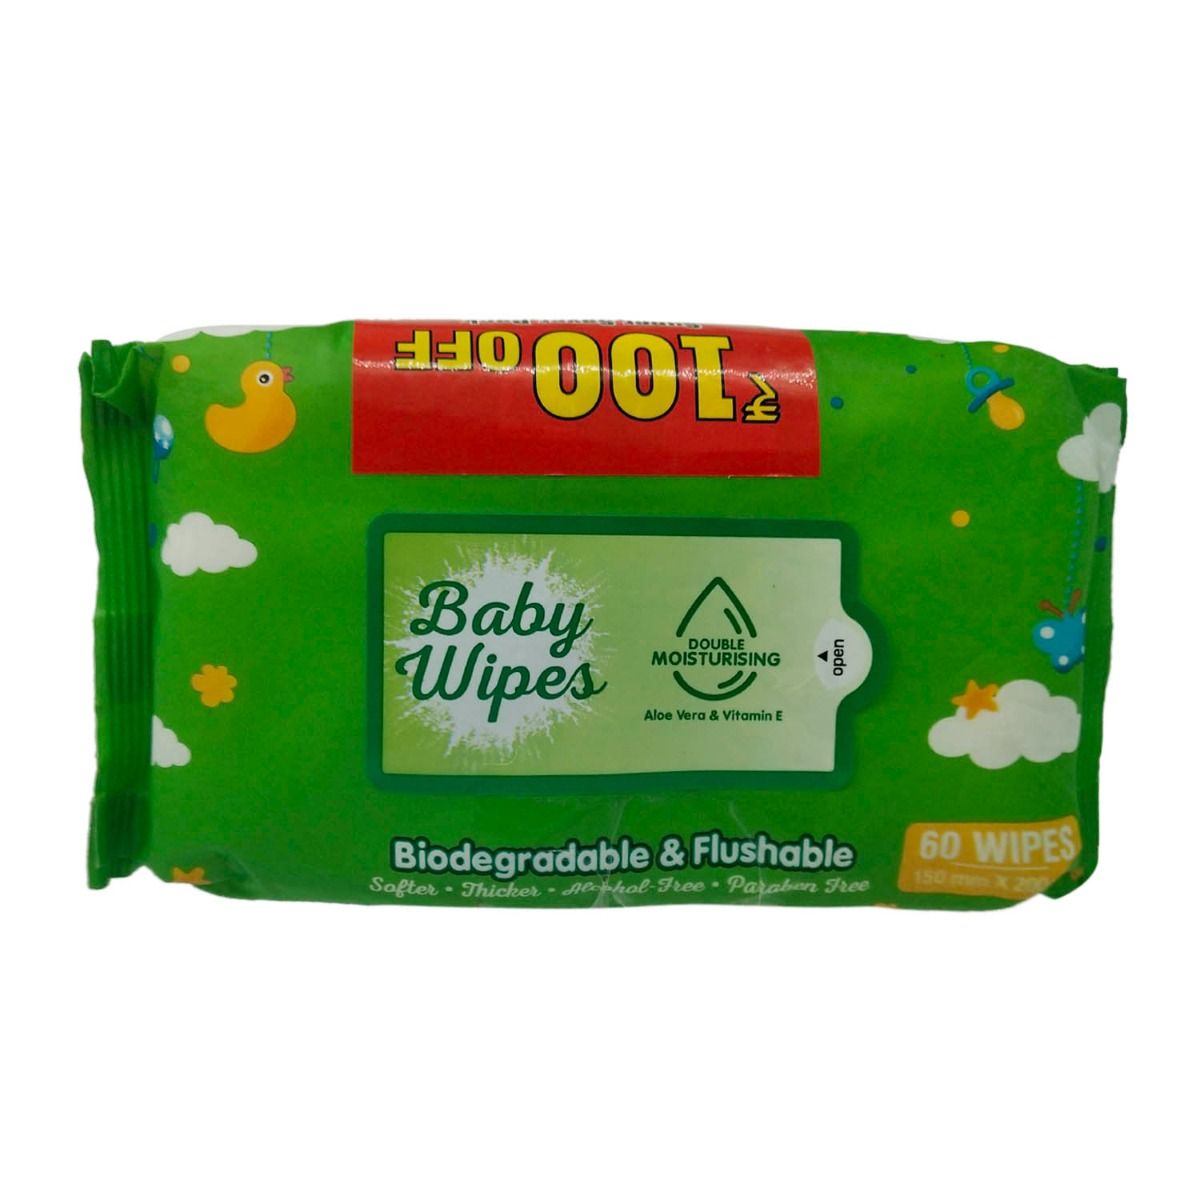 Buy Apollo Life Biodegradable & Flushable Baby Wipes, 120 Count (2 x 60 Wipes) Online